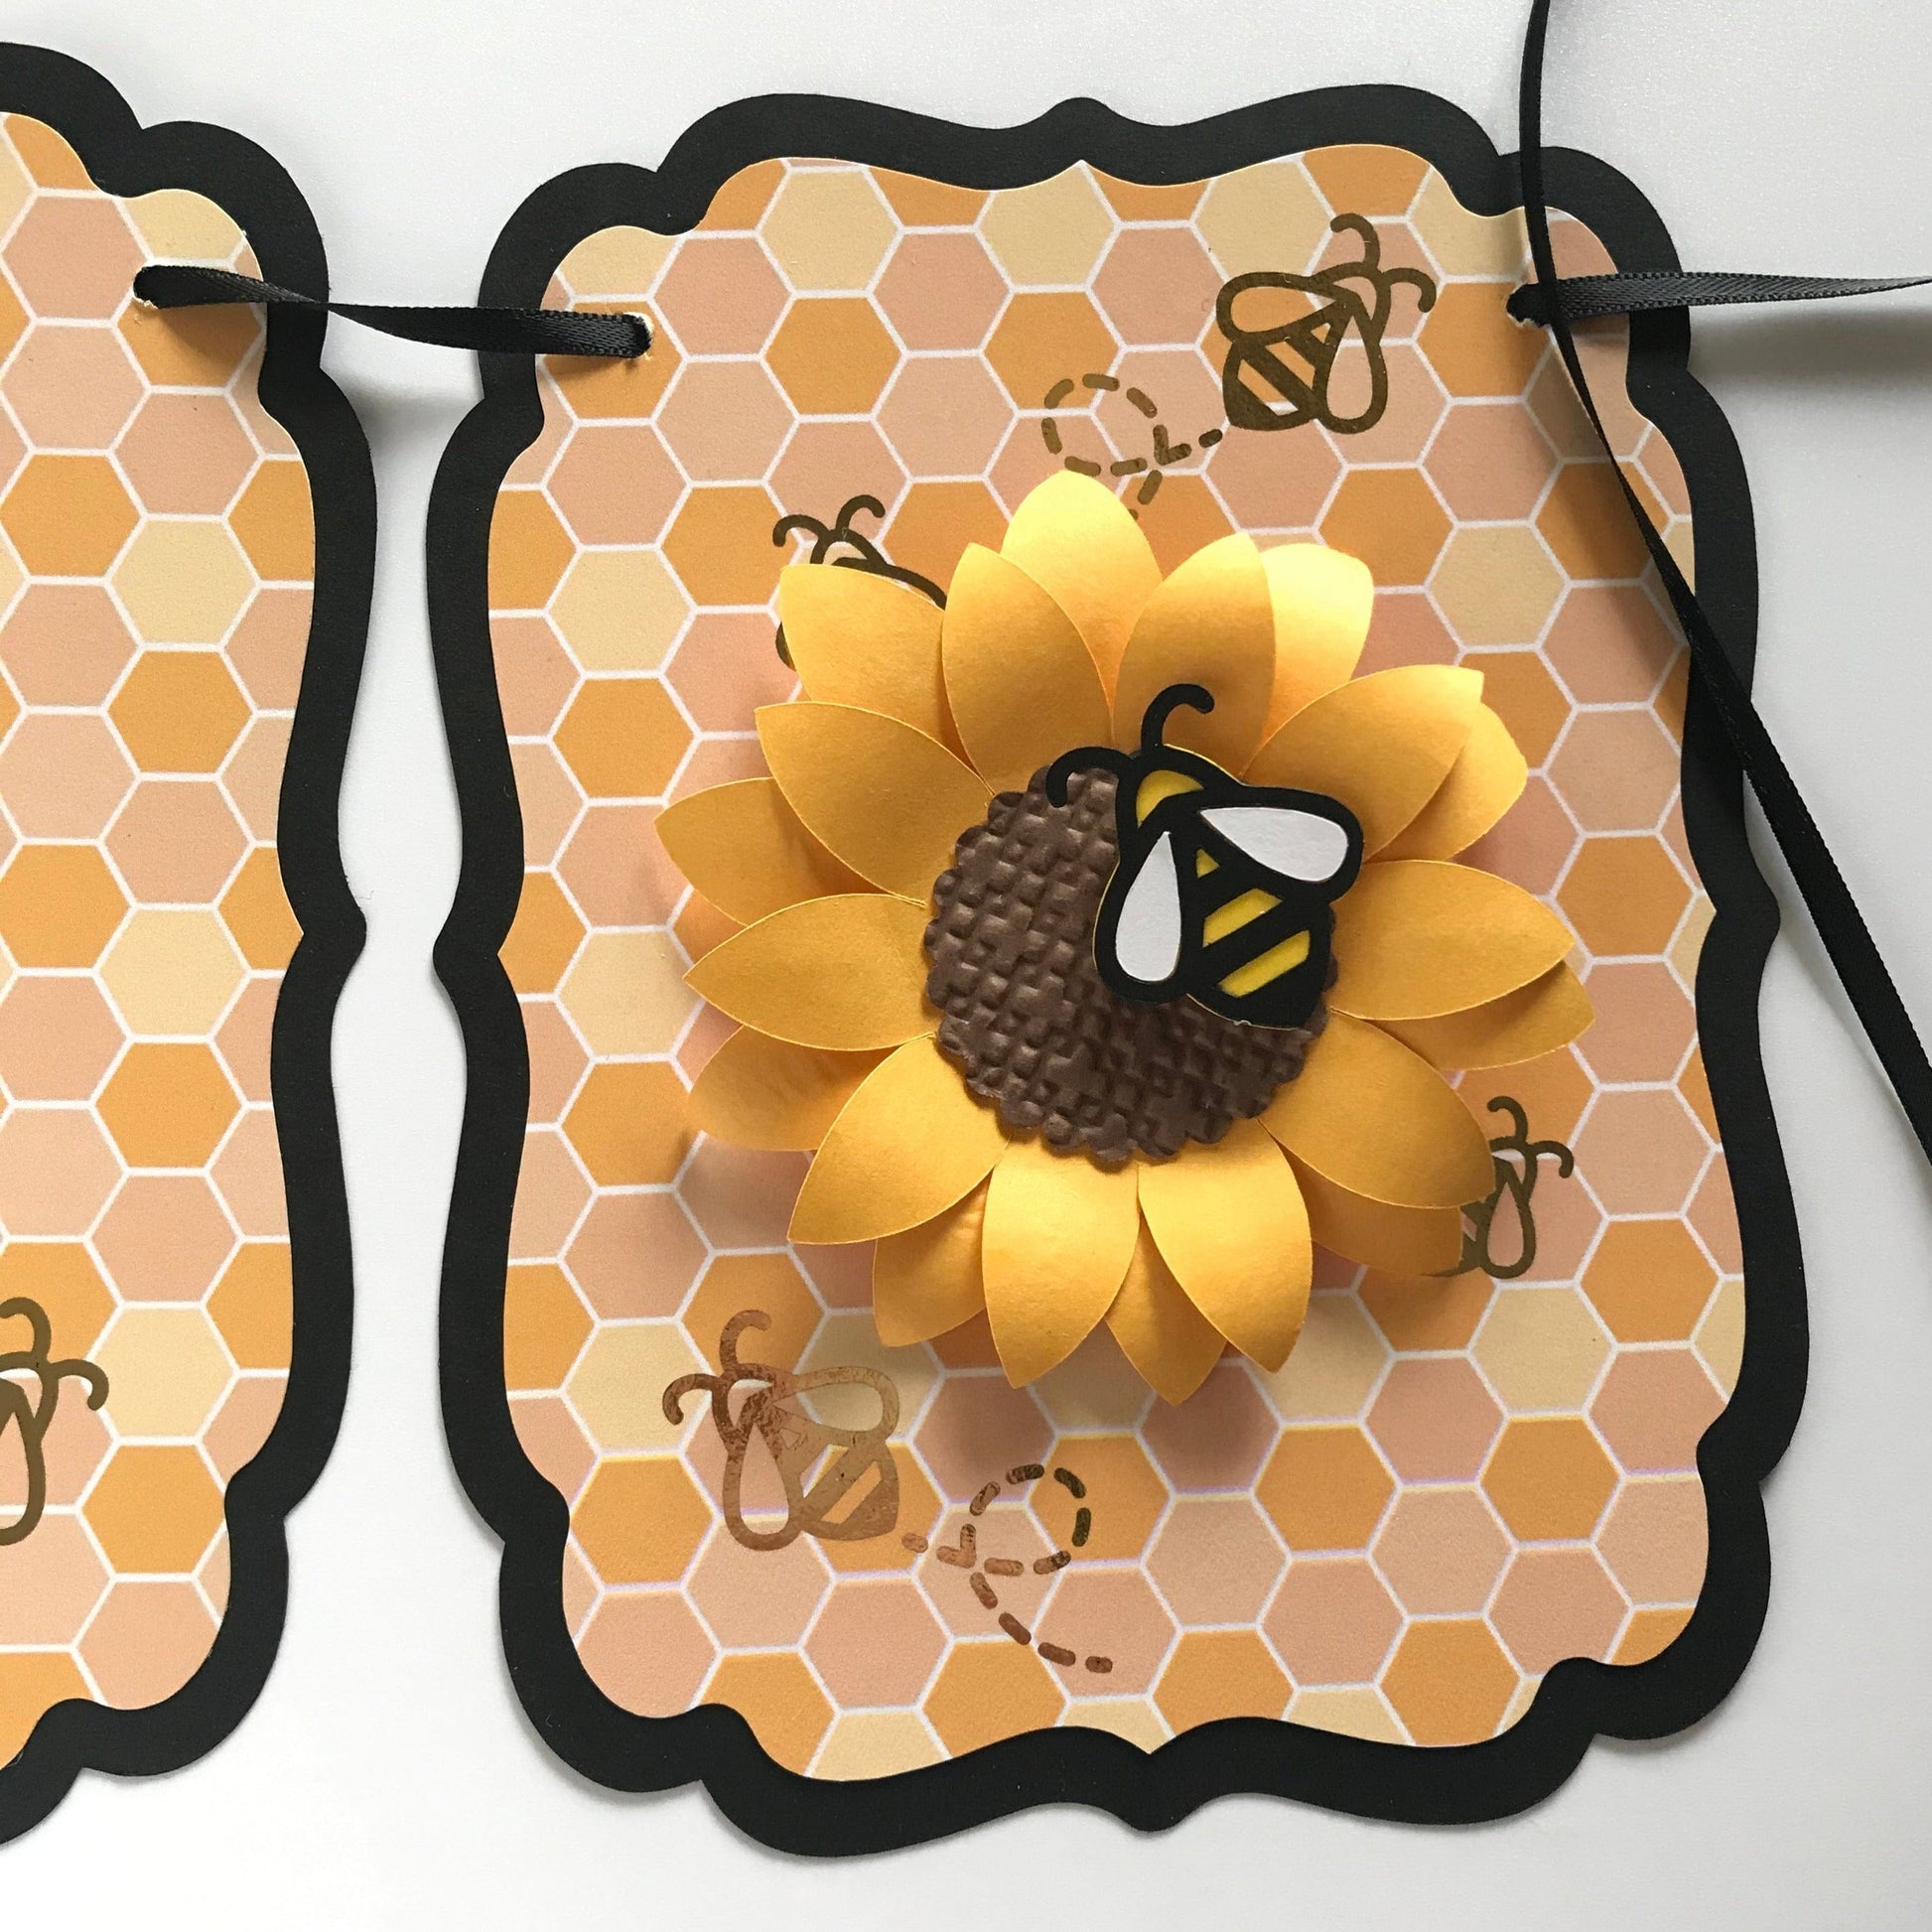 Adriana Ortiz Designs Banner Bumble bee banner with sunflowers